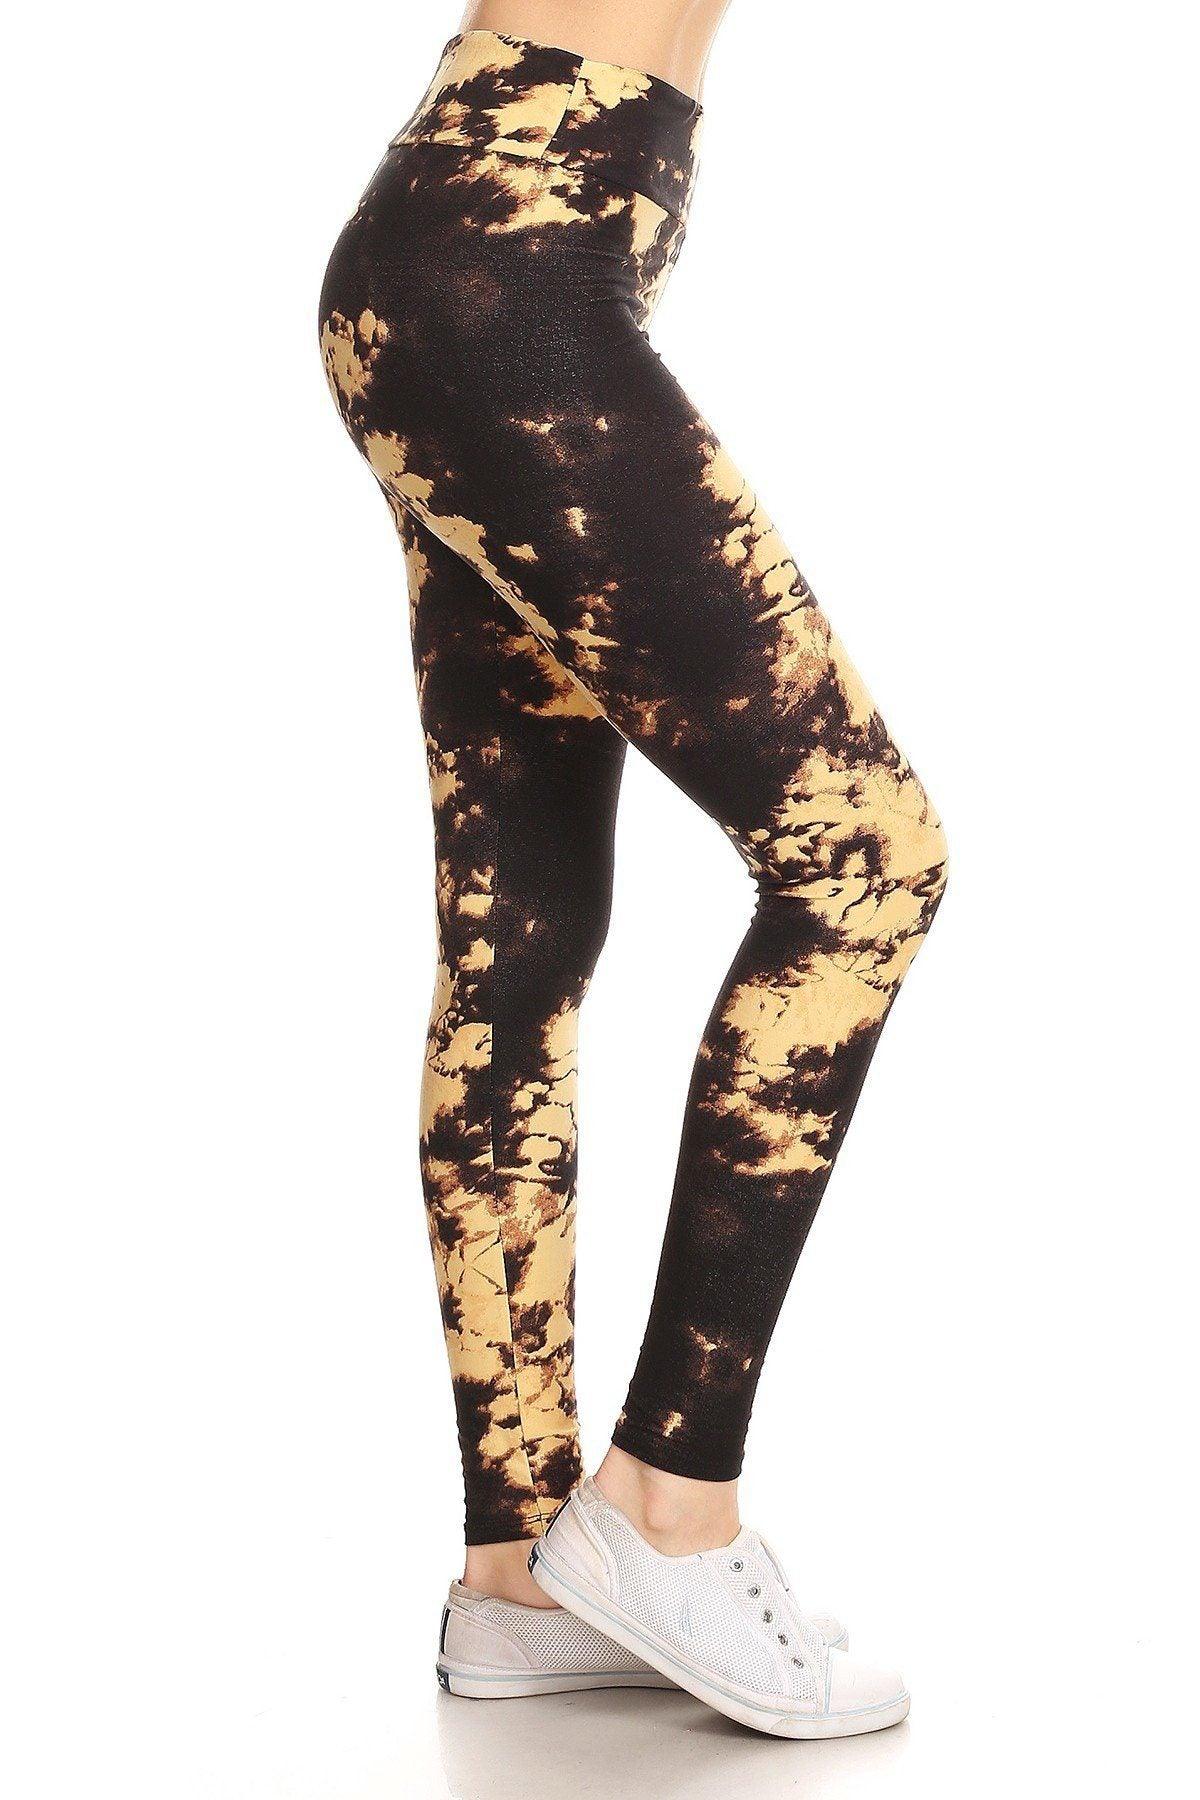 Yoga Style Banded Lined Tie Dye Print, Full Length Leggings In A Slim Fitting Style With A Banded High Waist.